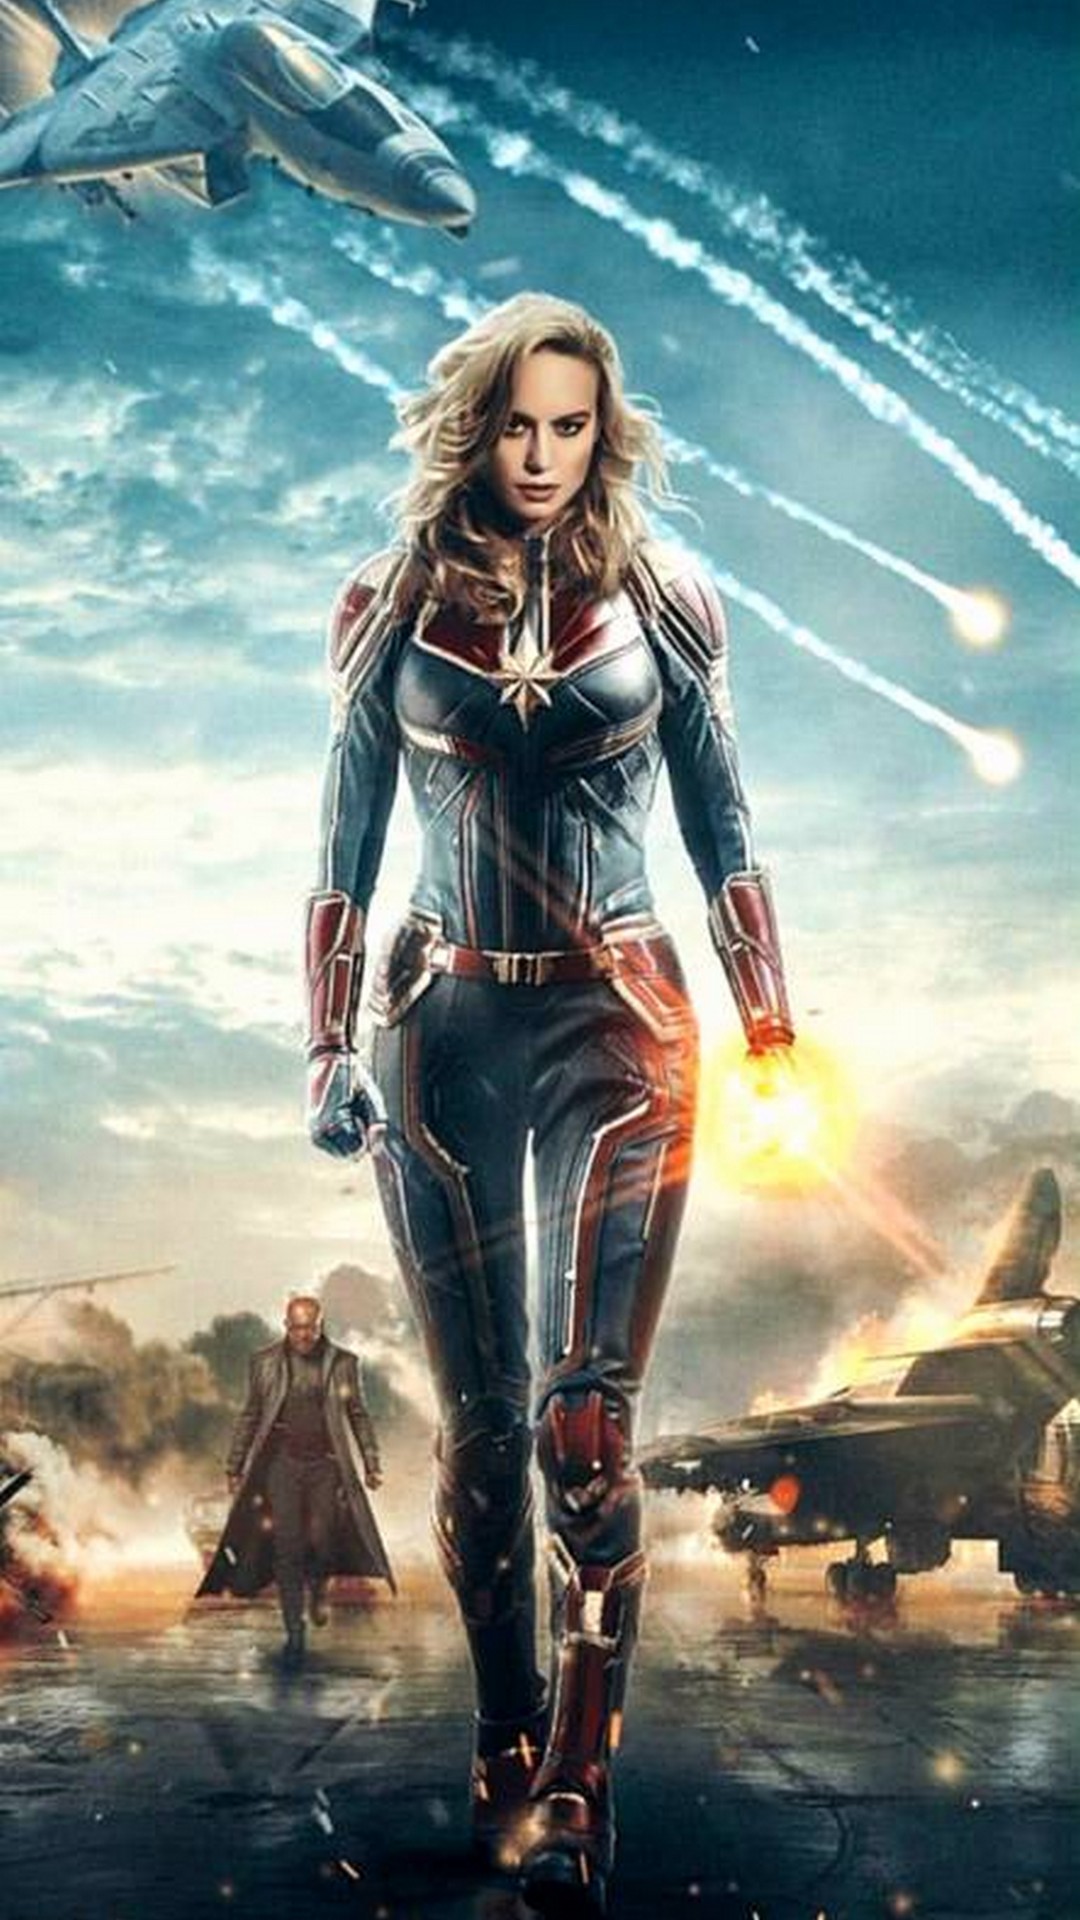 Captain Marvel Wallpaper iPhone With high-resolution 1080X1920 pixel. You can use this wallpaper for your iPhone 5, 6, 7, 8, X backgrounds, Mobile Screensaver, or iPad Lock Screen